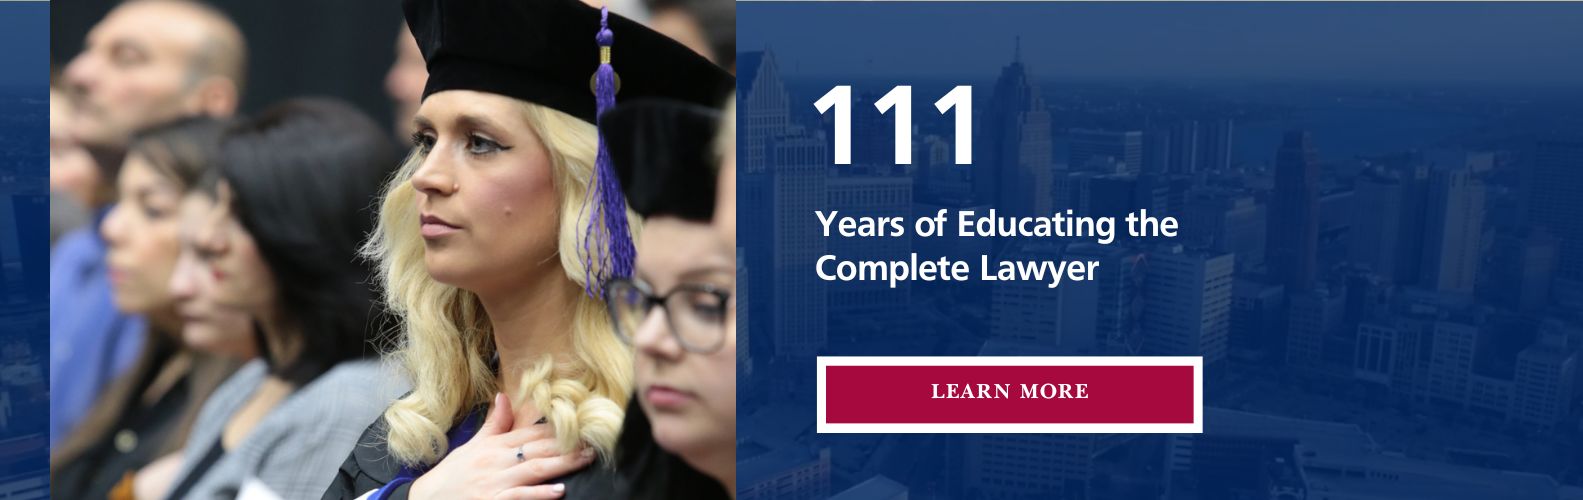 109 years of educating the complete lawyer